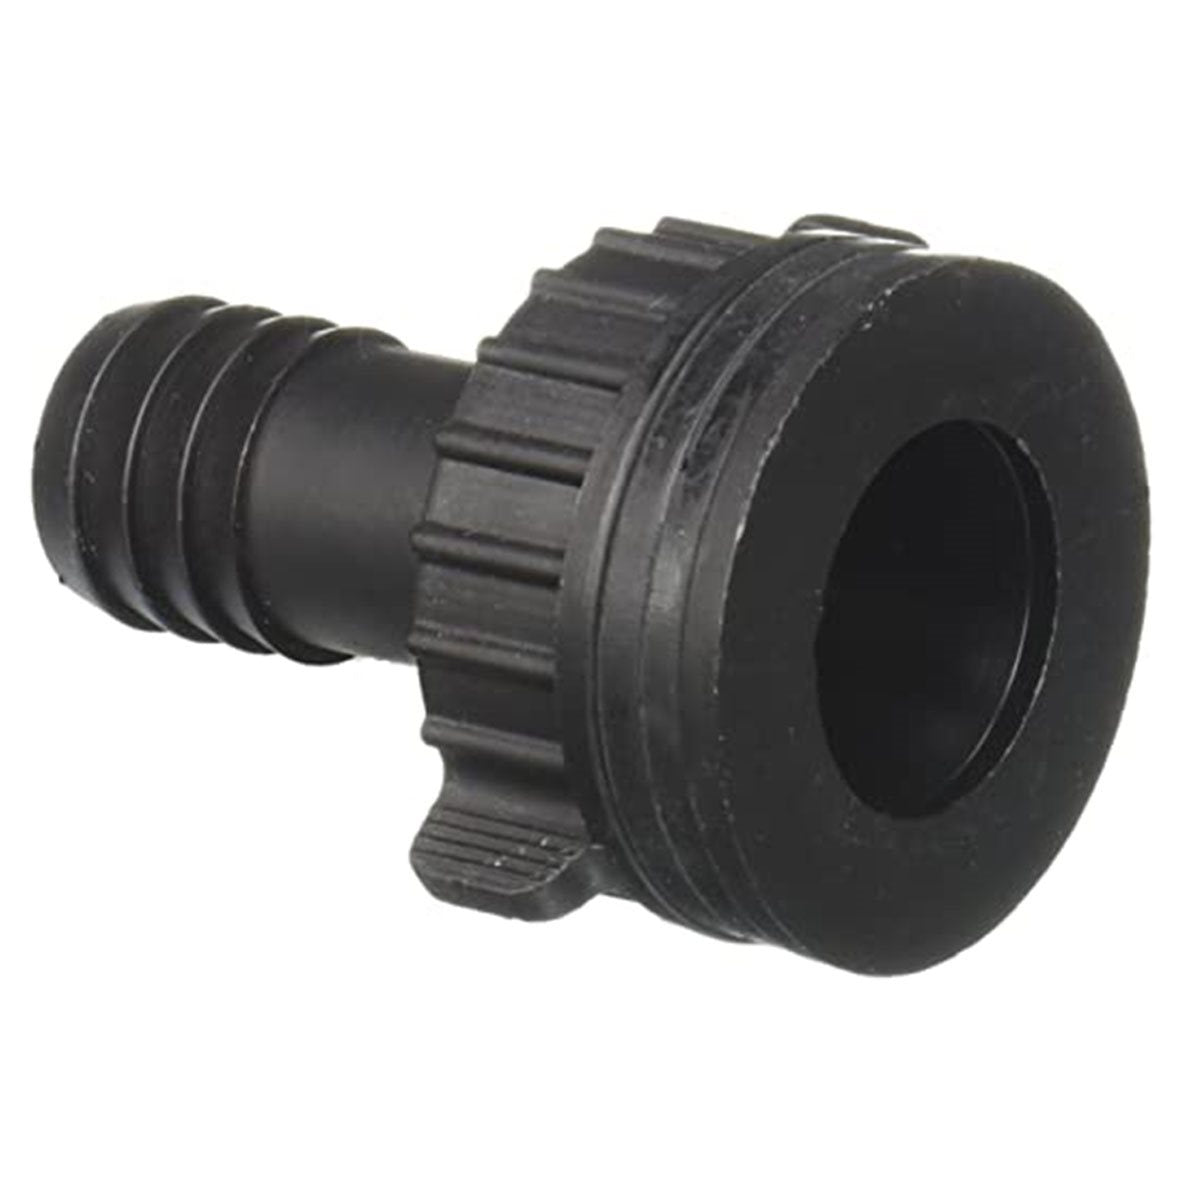 Product Secondary Image:Grow1 Drain Fitting 3 / 4